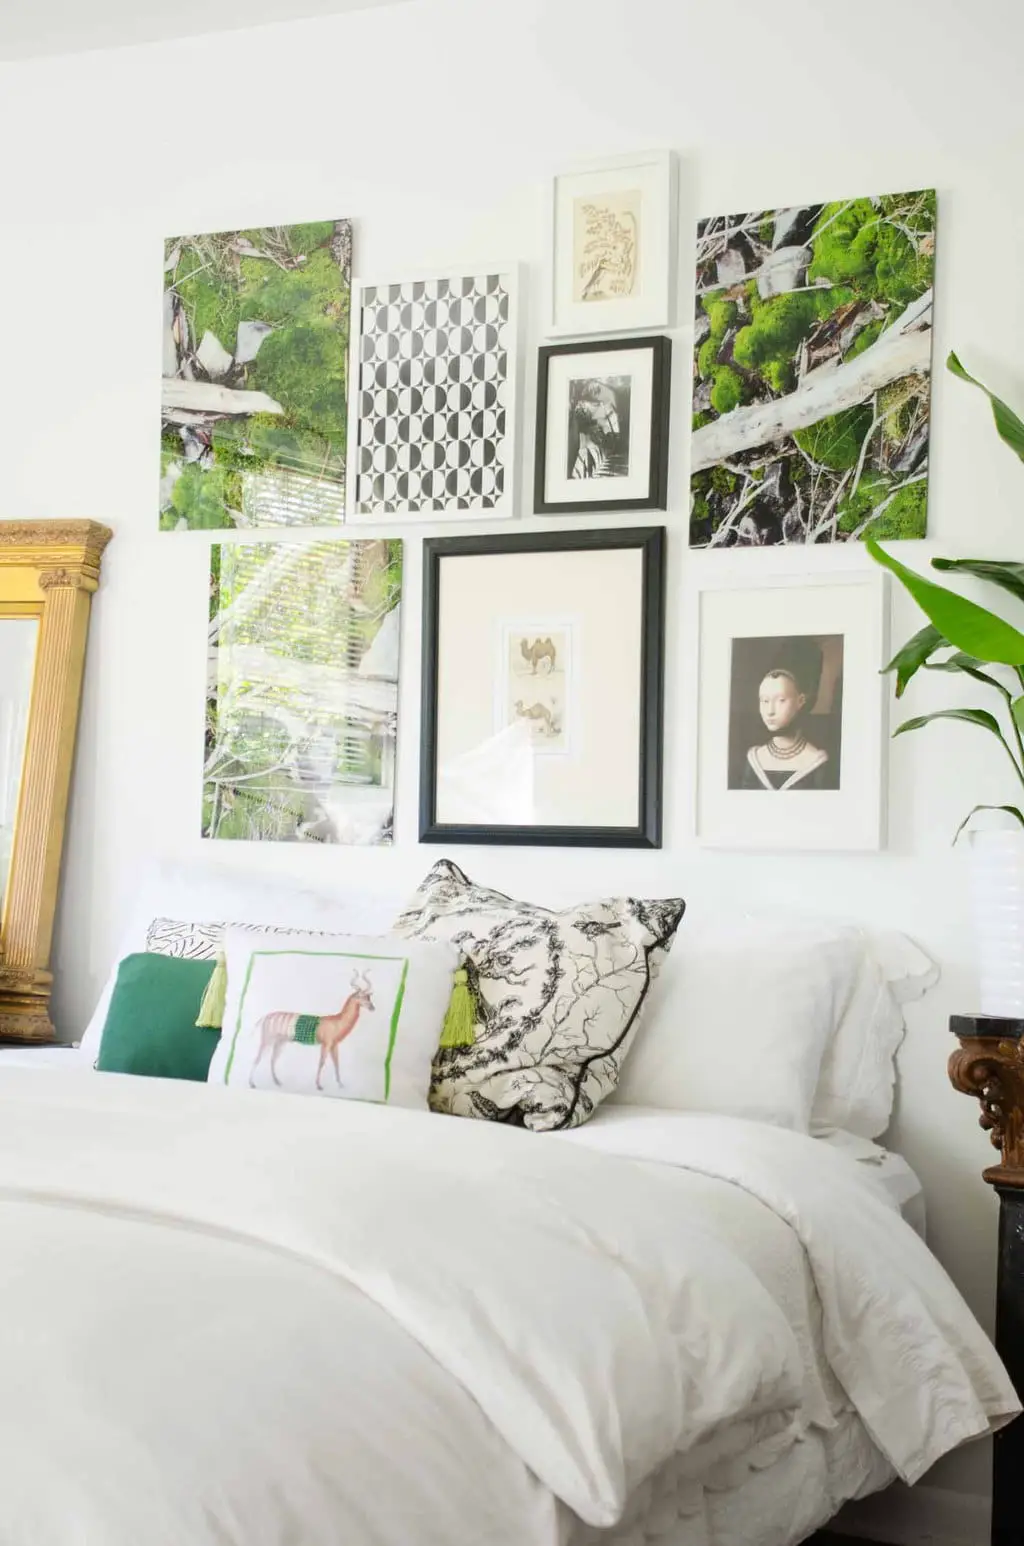 Eclectic bedroom with gallery wall and glass prints via @thouswellblog